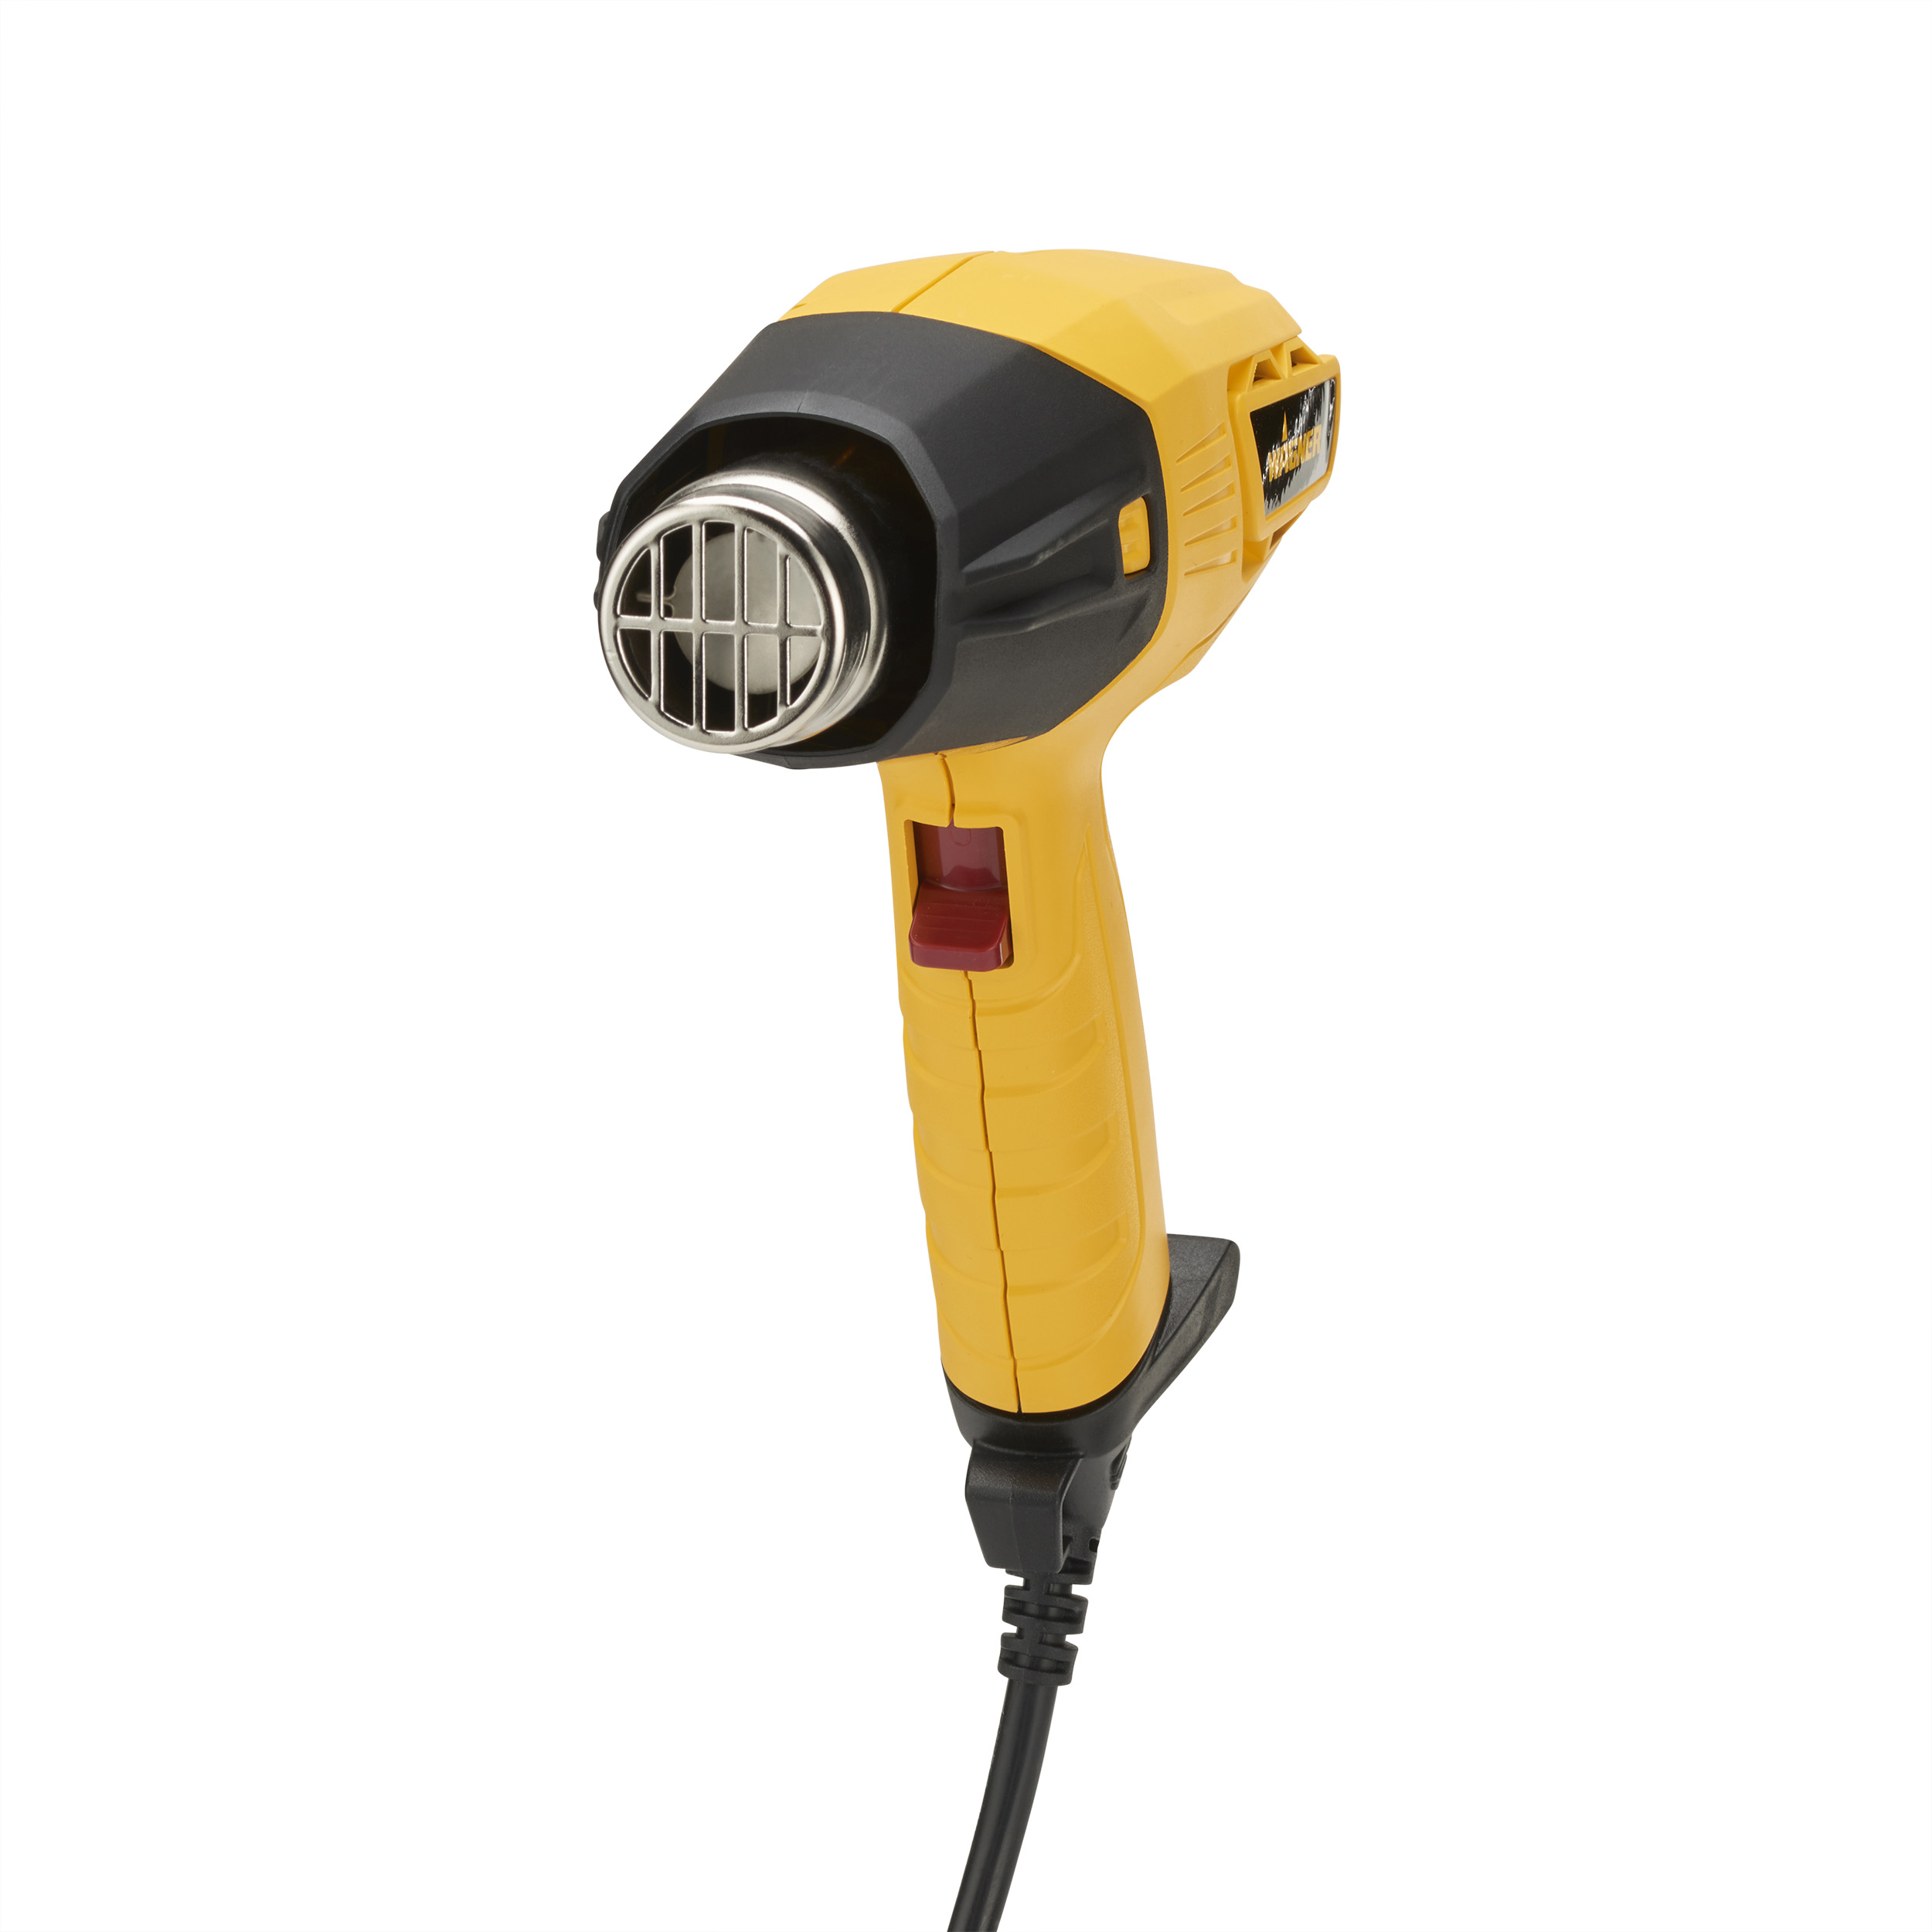 Wagner Furno 300 Heat Gun review/Demo by The Shack 